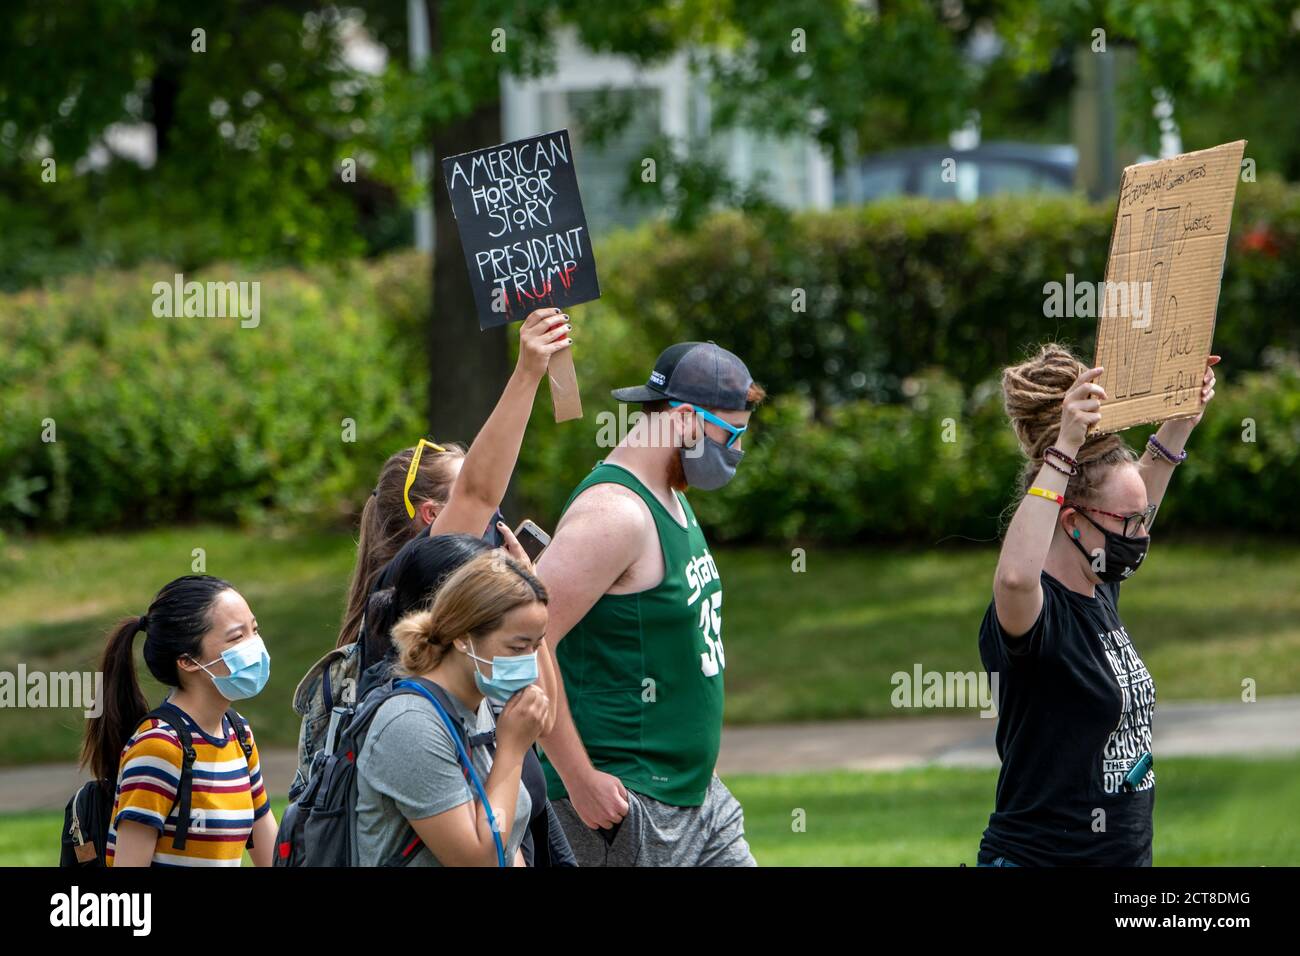 St Paul Minnesota August 22 Youth March And Rally To End Violence Protester Holding American Horror Story President Trump Sign Stock Photo Alamy